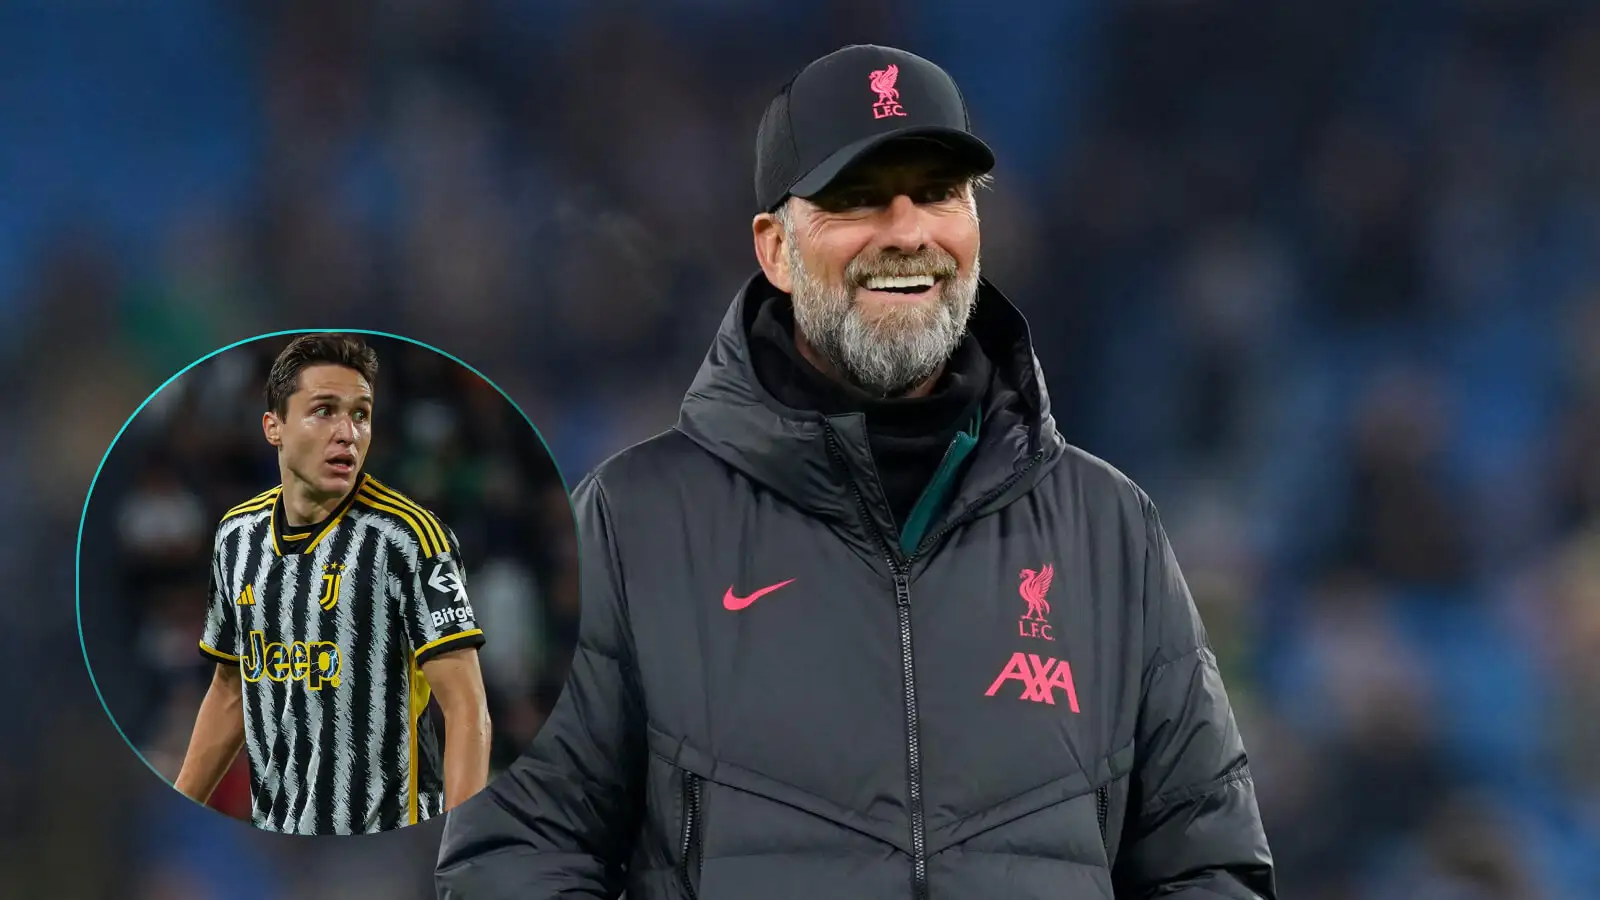 Jurgen Klopp could be key to Federico Chiesa joining Liverpool from Juventus this summer.